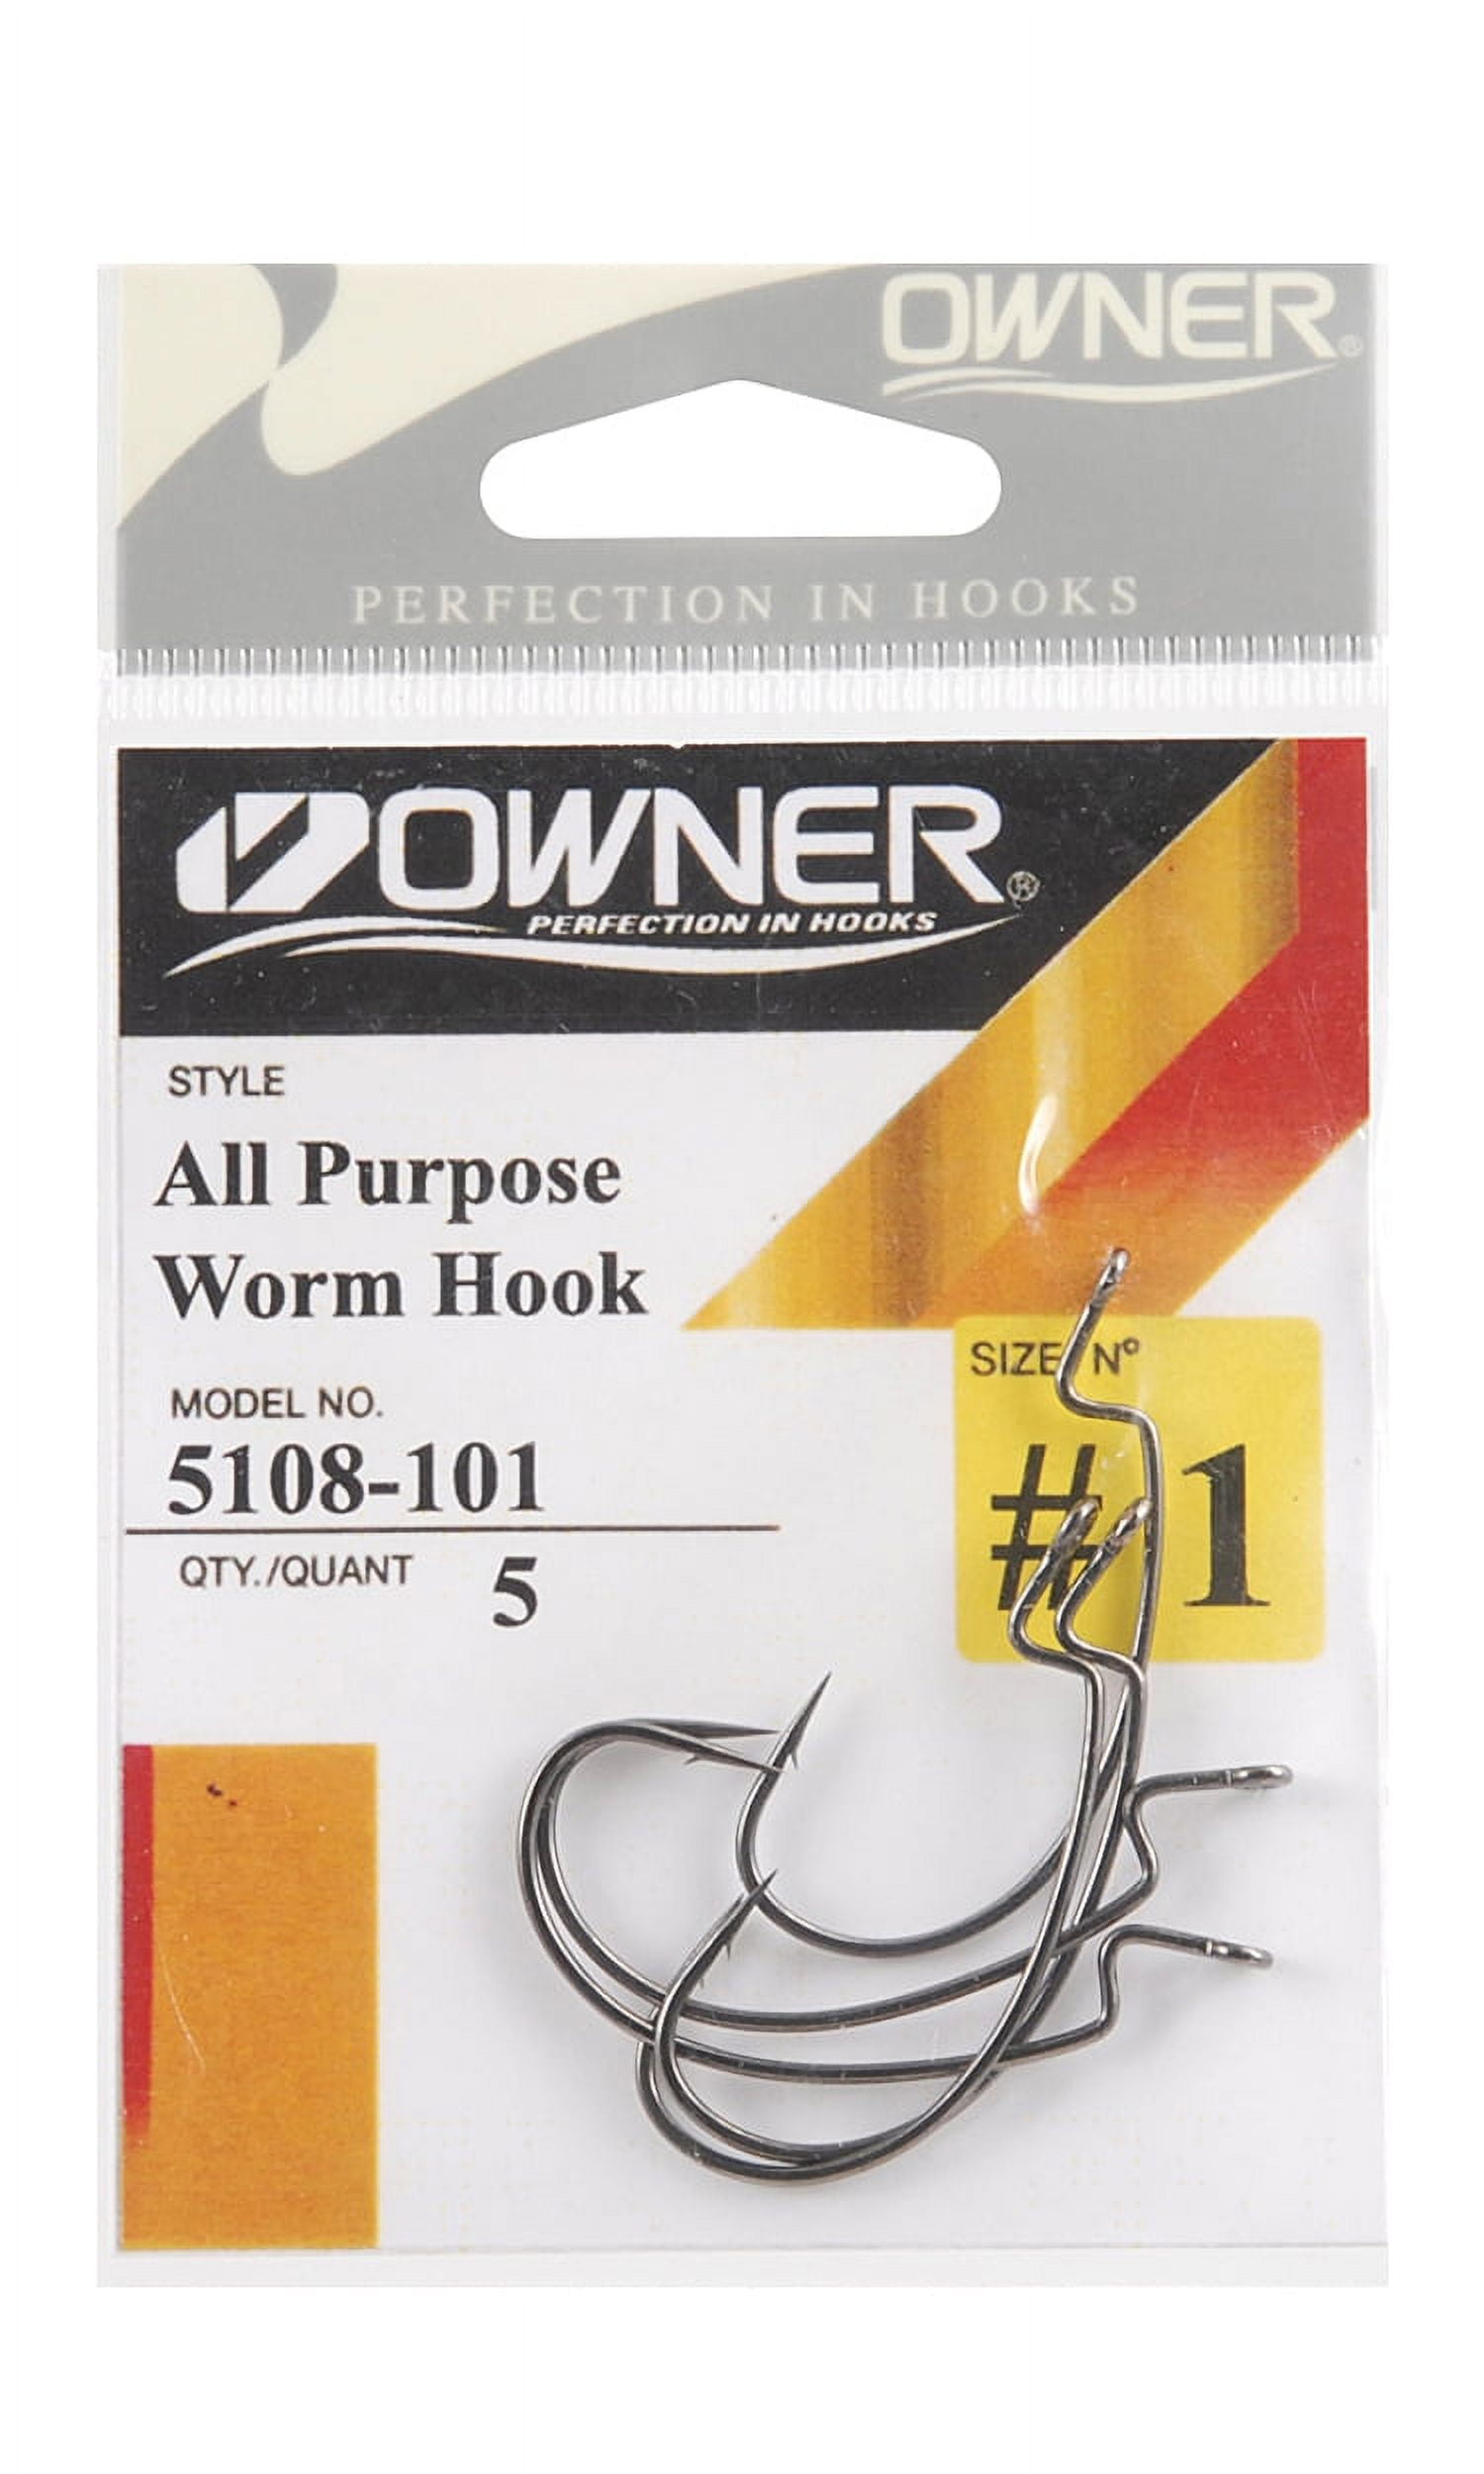 Owner 5108-101 All Purpose Soft Bait Hook 5 per Pack Size 1 Fishing Hook